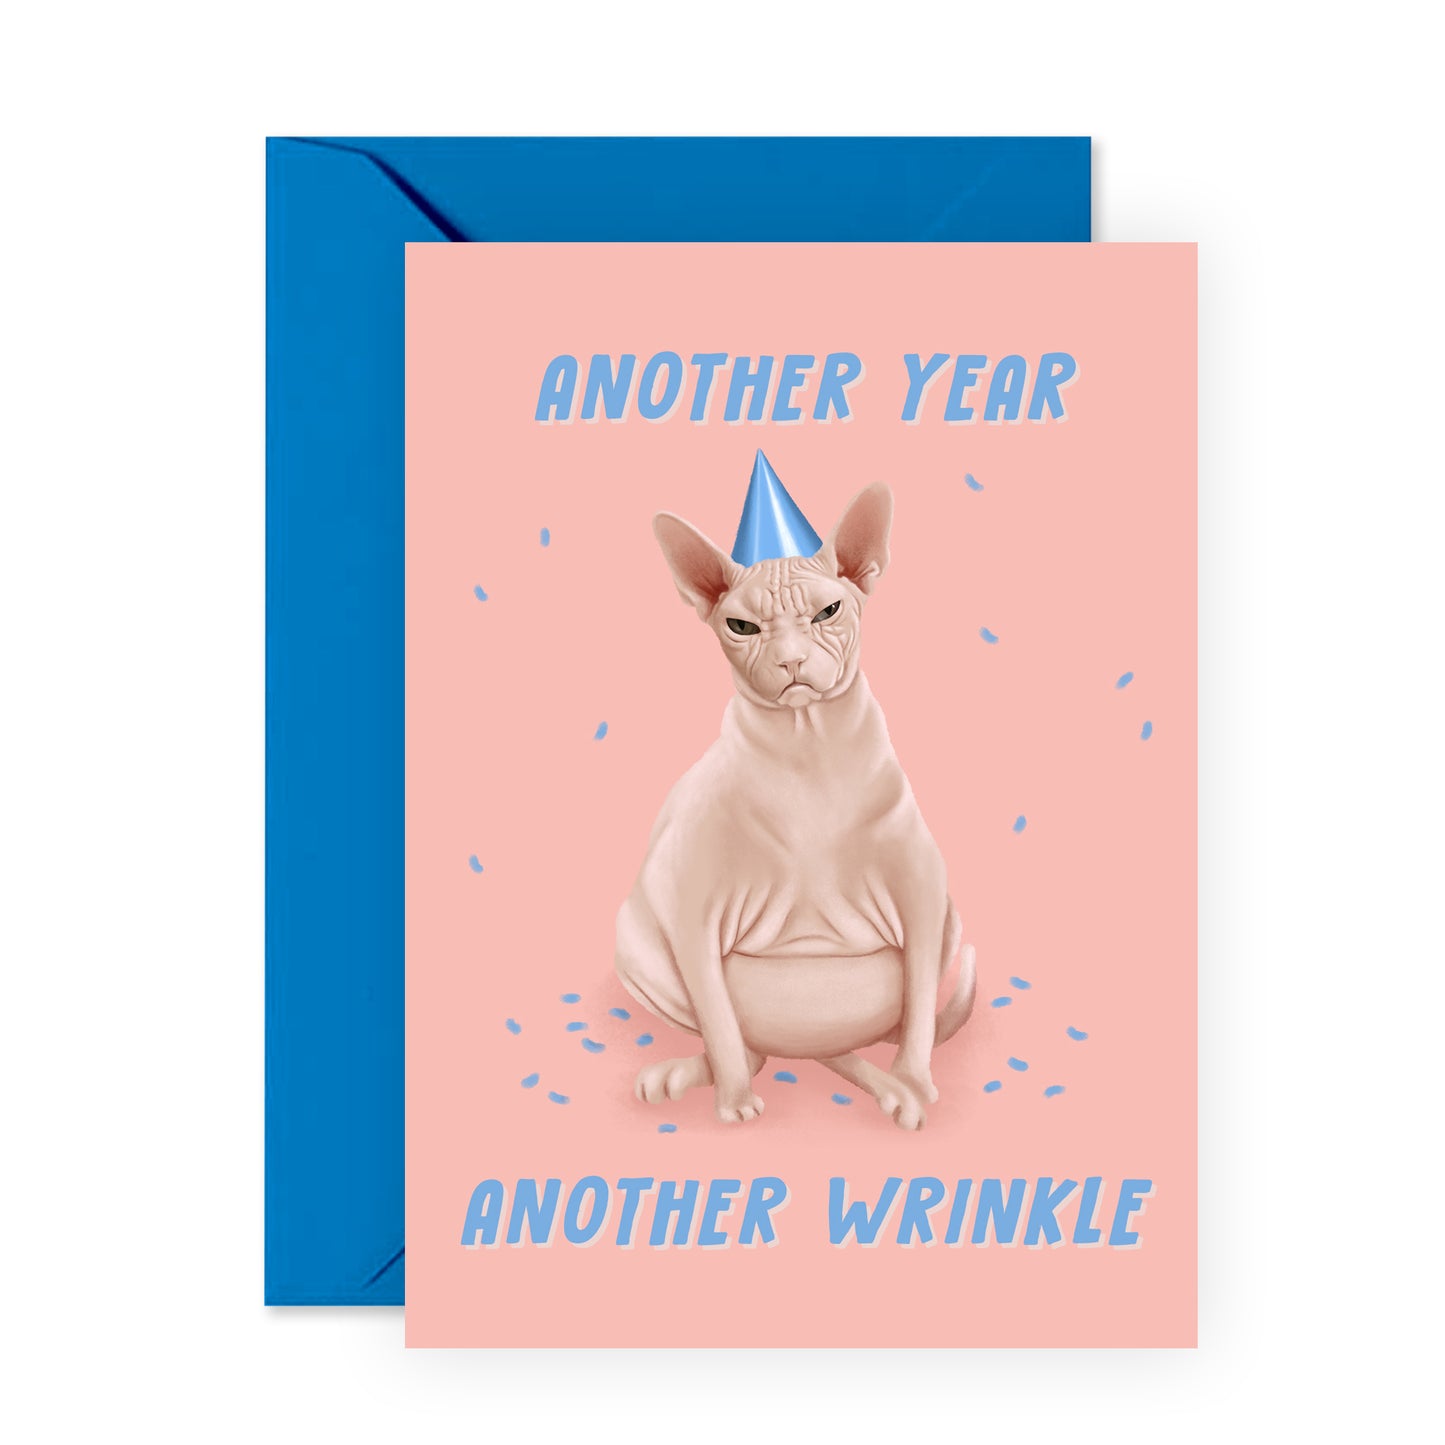 Funny Birthday Card - Sphynx Cat Another Year Another Wrinkle - For Men Women Him Her